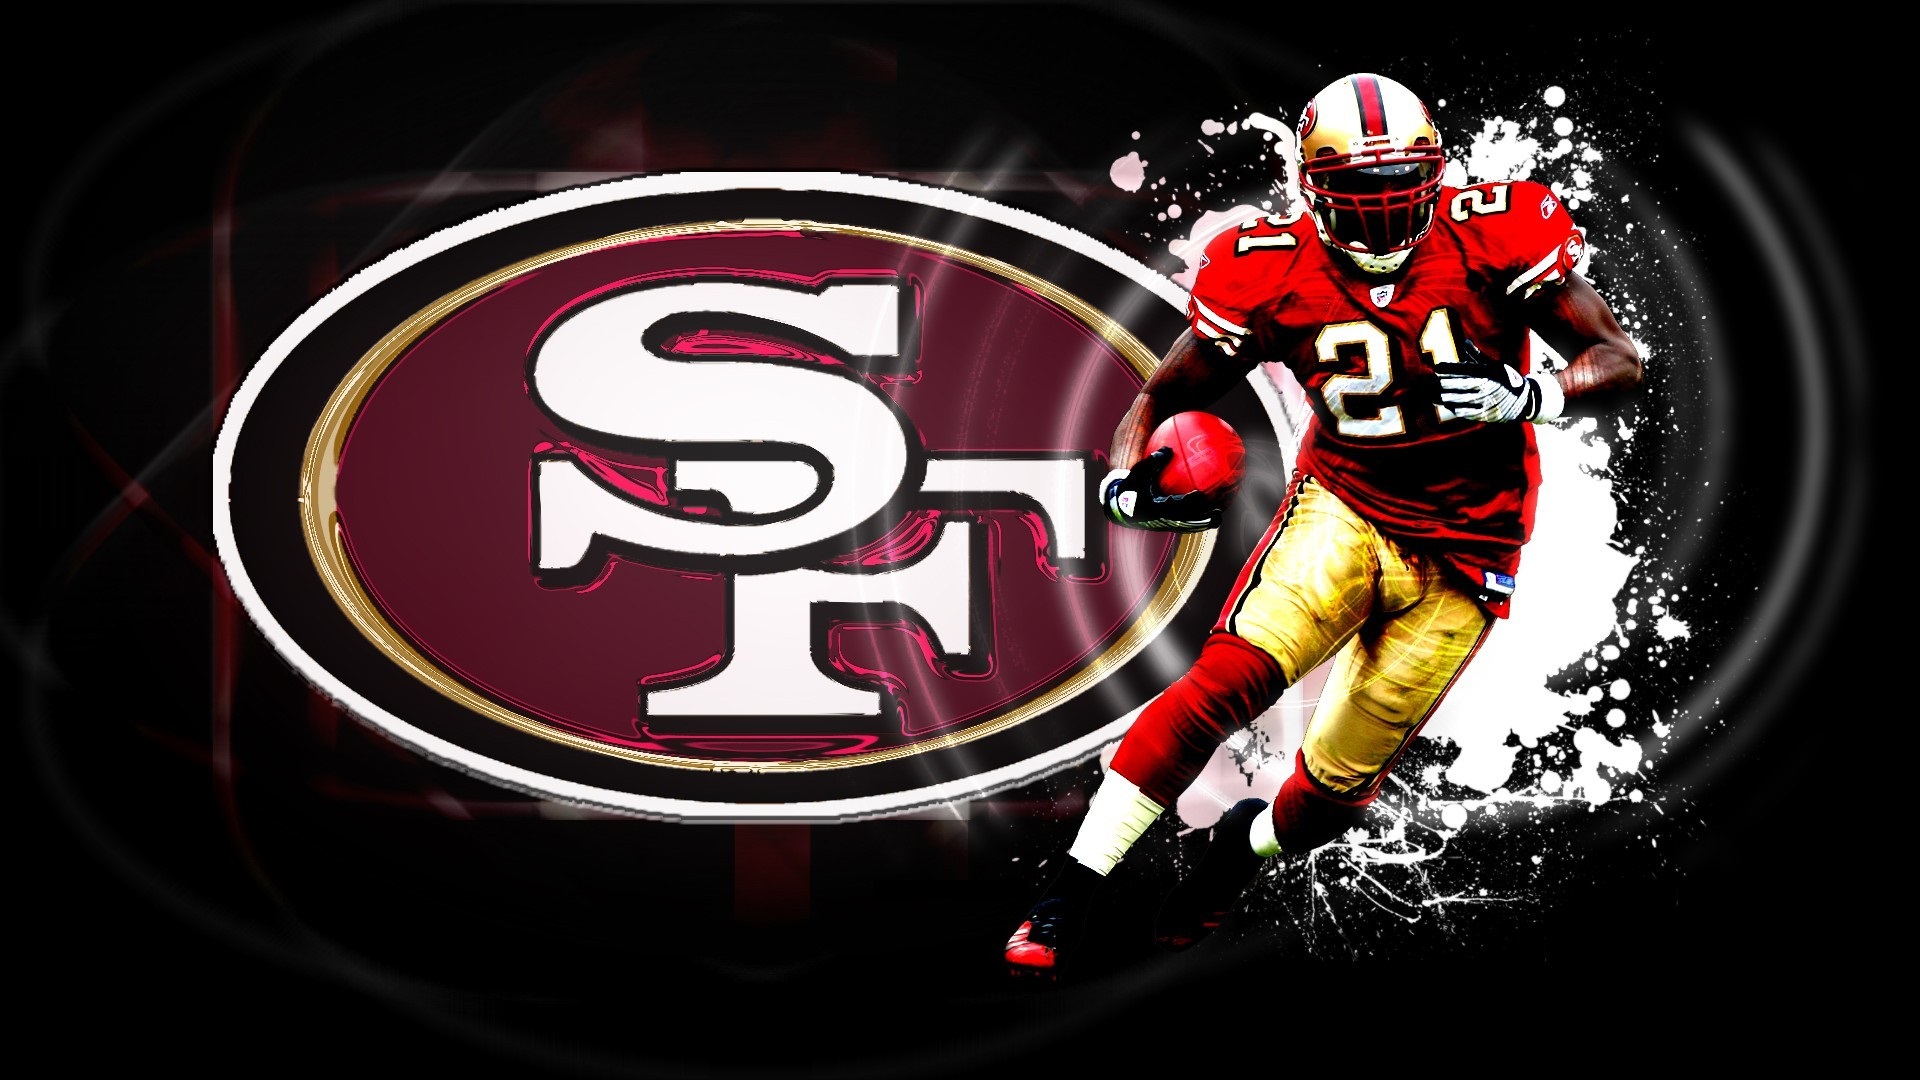 HD San Francisco 49ers Backgrounds With high-resolution 1920X1080 pixel. You can use this wallpaper for your Mac or Windows Desktop Background, iPhone, Android or Tablet and another Smartphone device